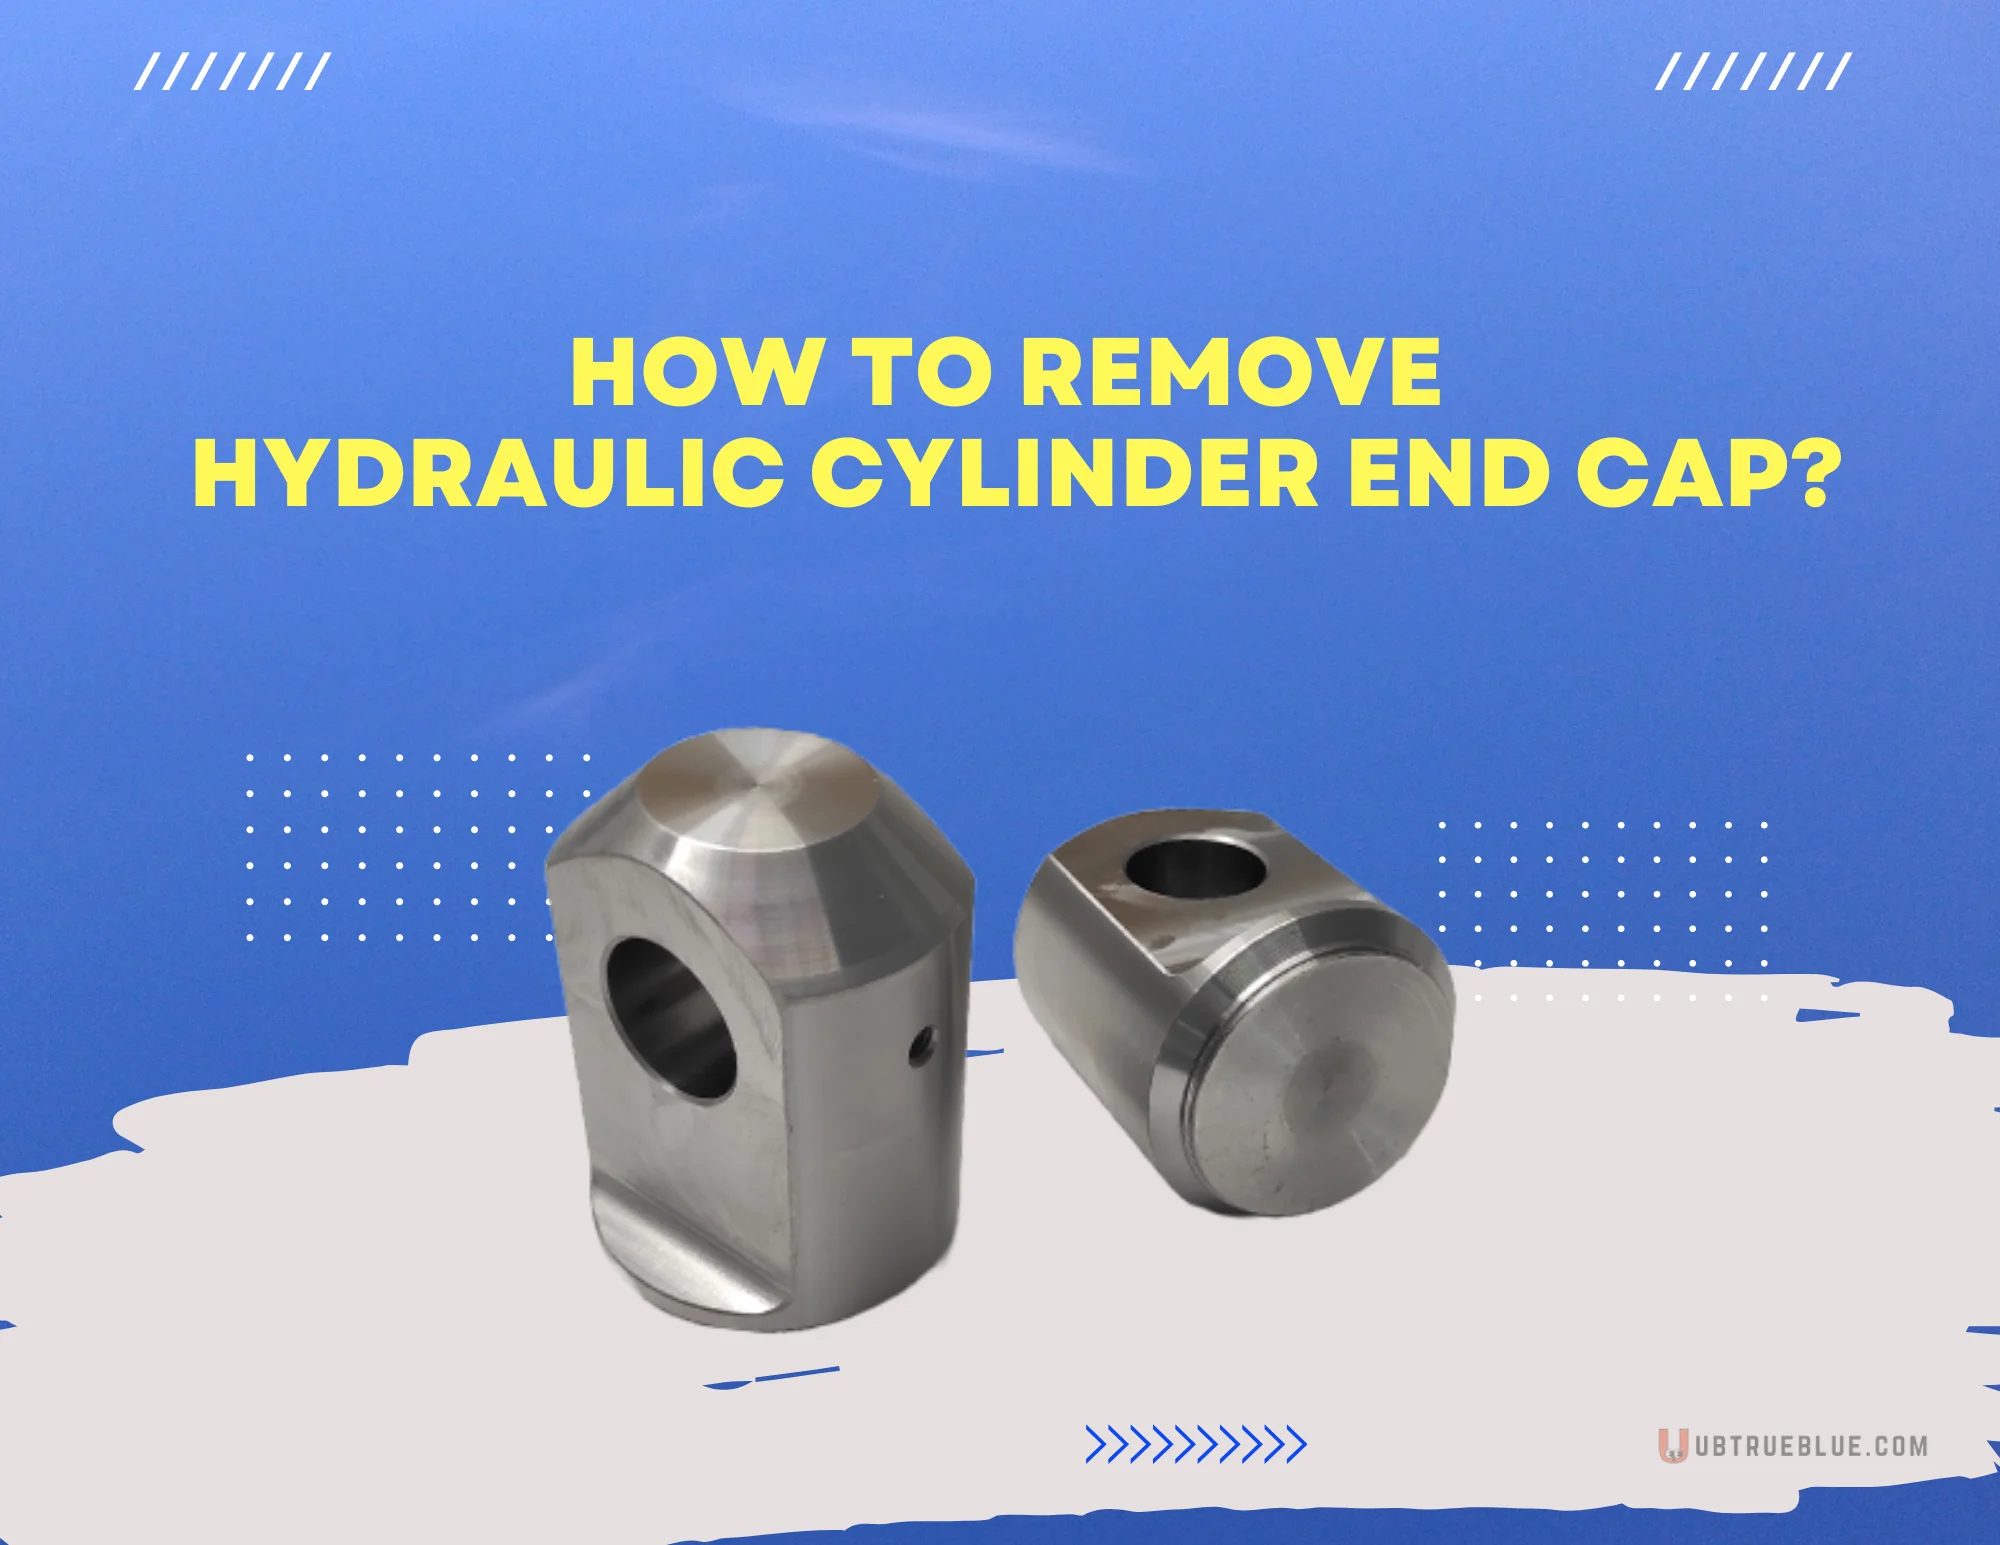 Hydraulic Cylinder End Cap Ubtrueblue Automotive Important Tips To Remove A Piston Disassembly Tools Pins Disassemble  Full